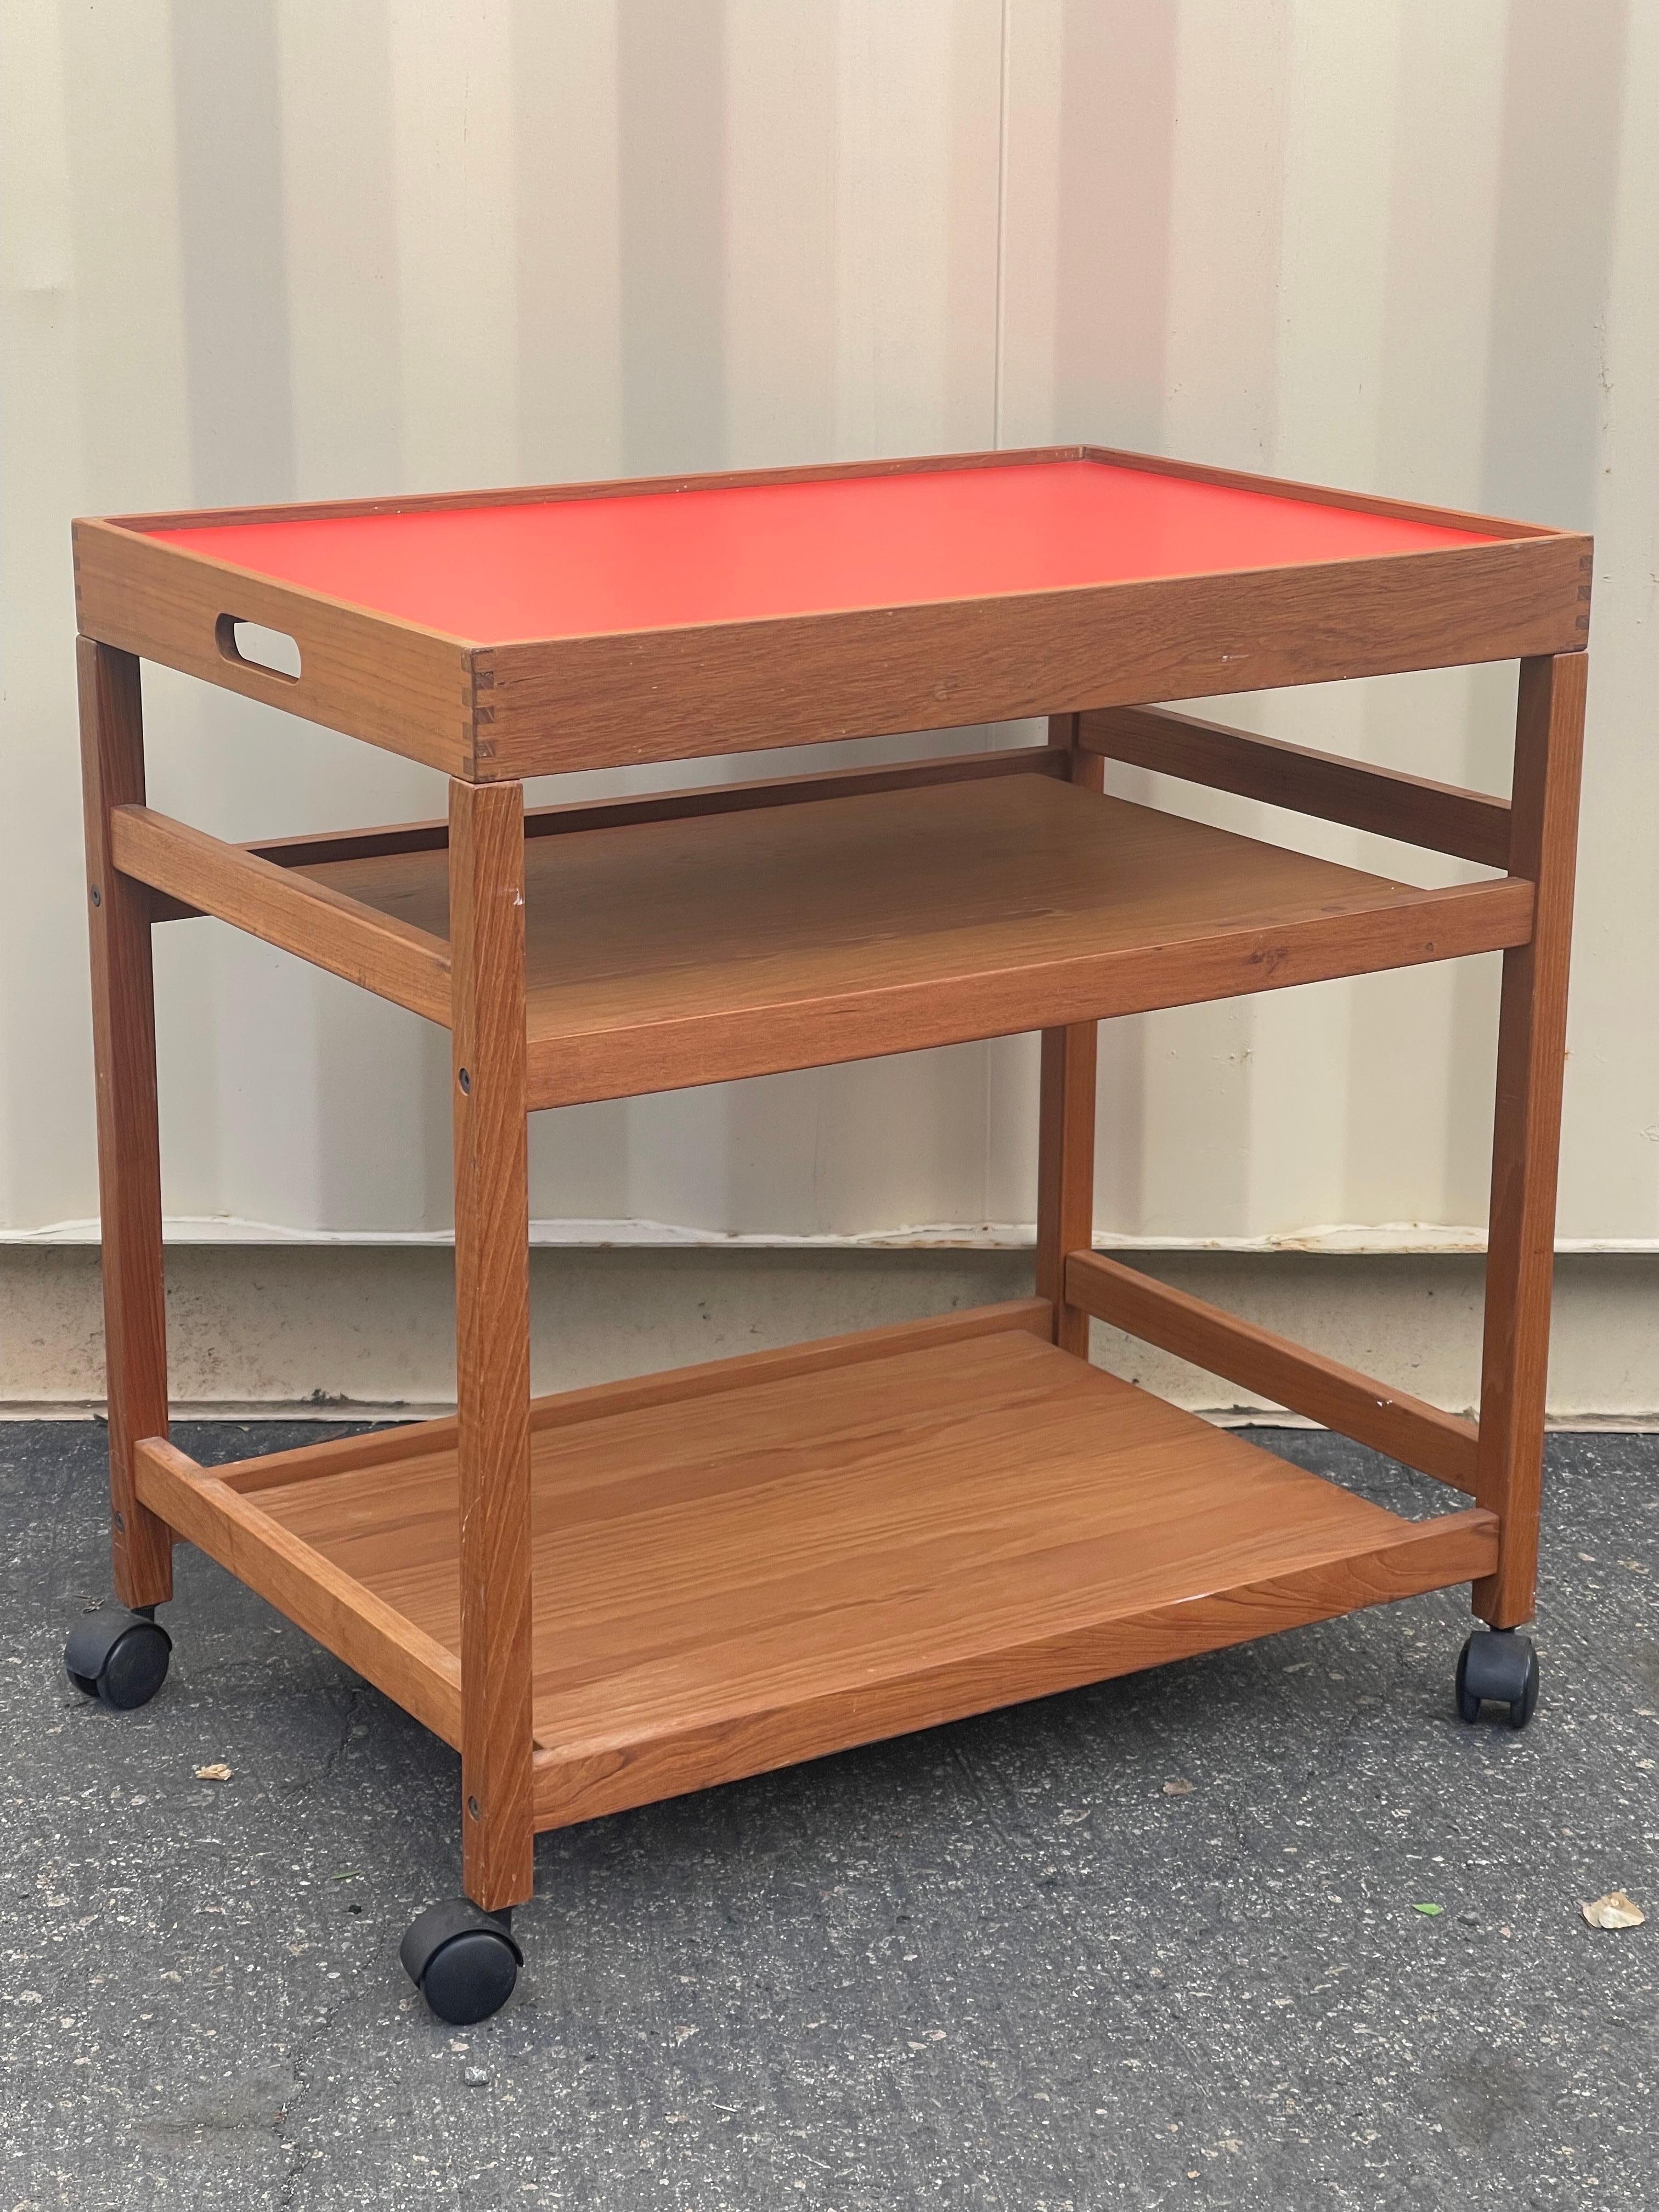 Super rare and extremely desirable Danish modern teak bar cart or serving trolley with reversible and removable tray, circa 1970s. The top shelf is removable tray that lifts off; one side has a bright orange laminate surface and the other a black